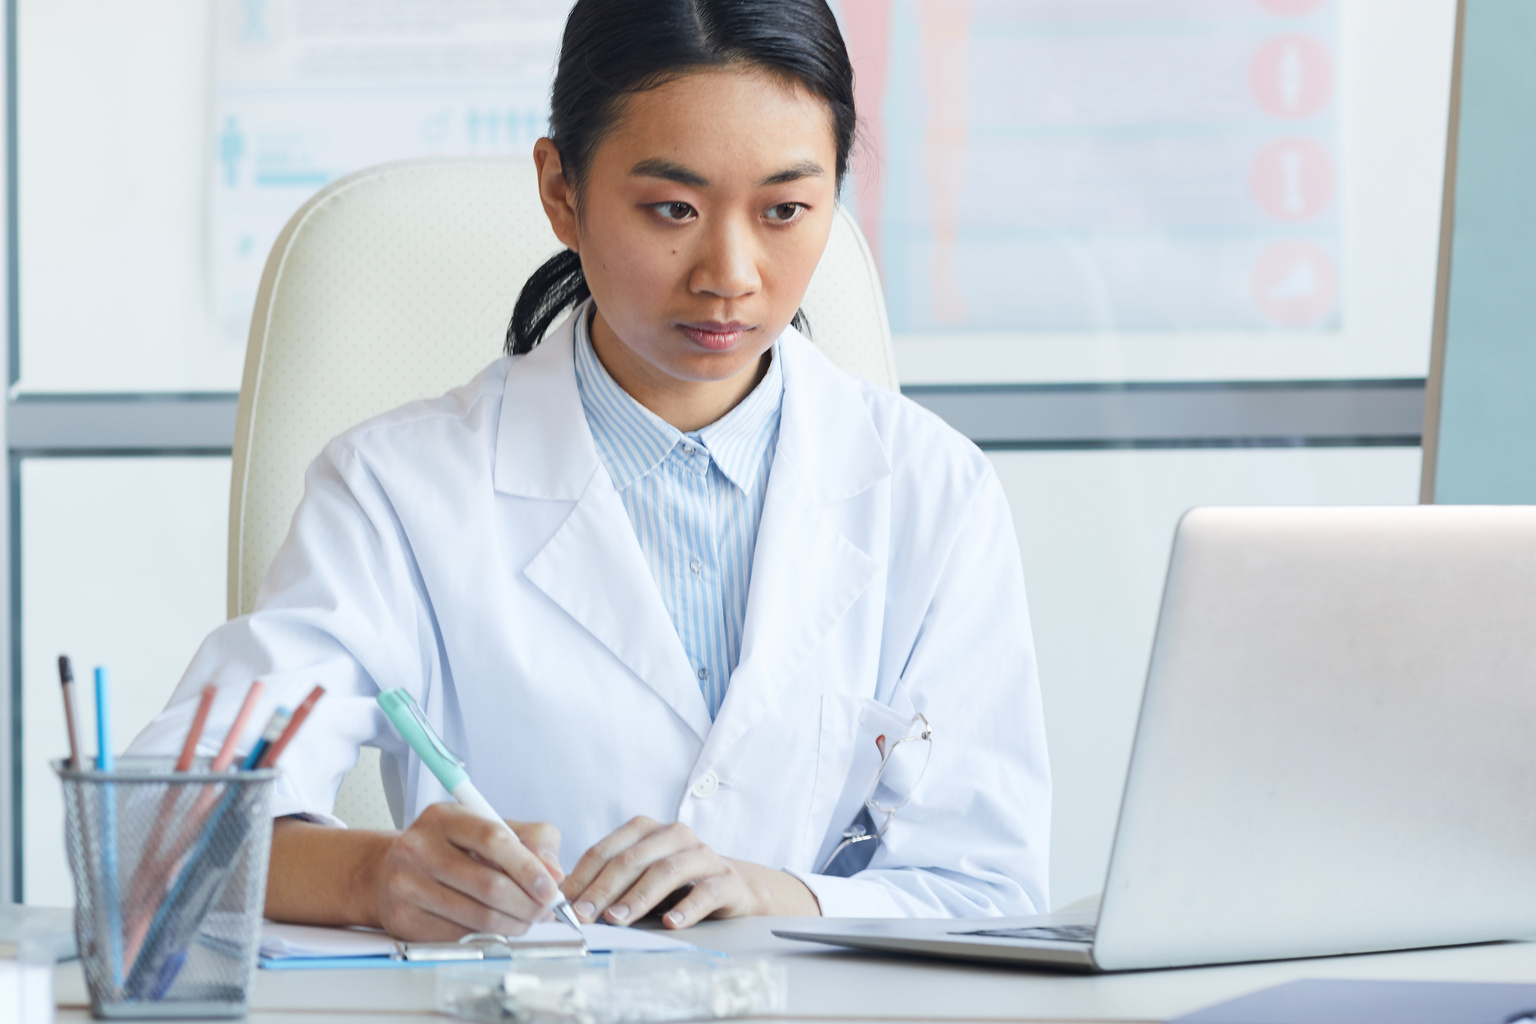 Portrait of female Asian doctor using laptop while sitting at workplace in medical office interior